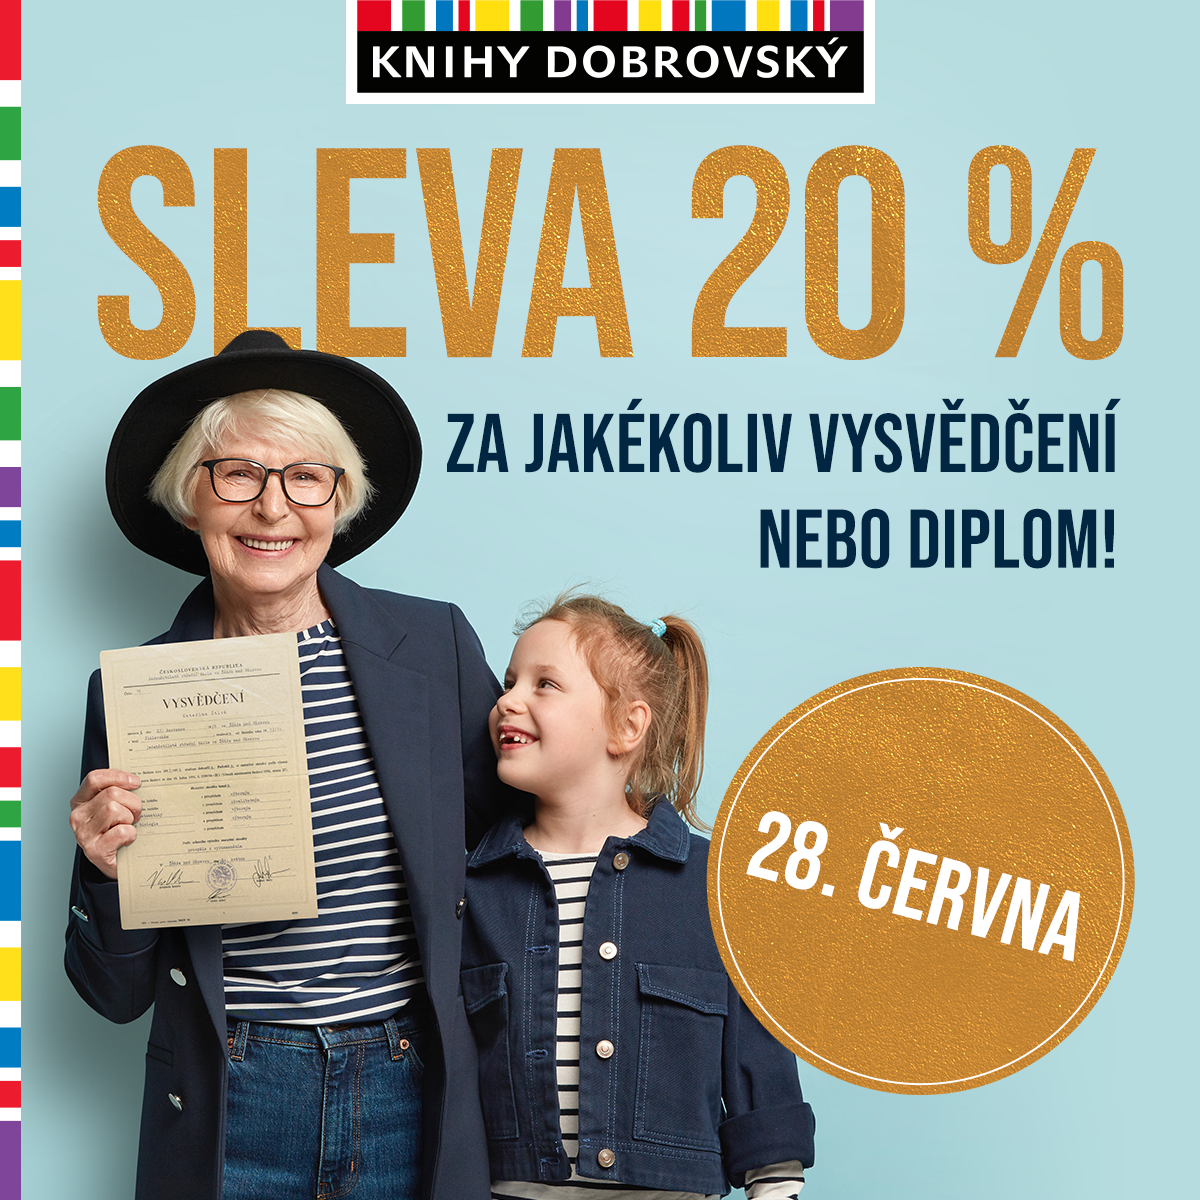 Discount for (any) certificate